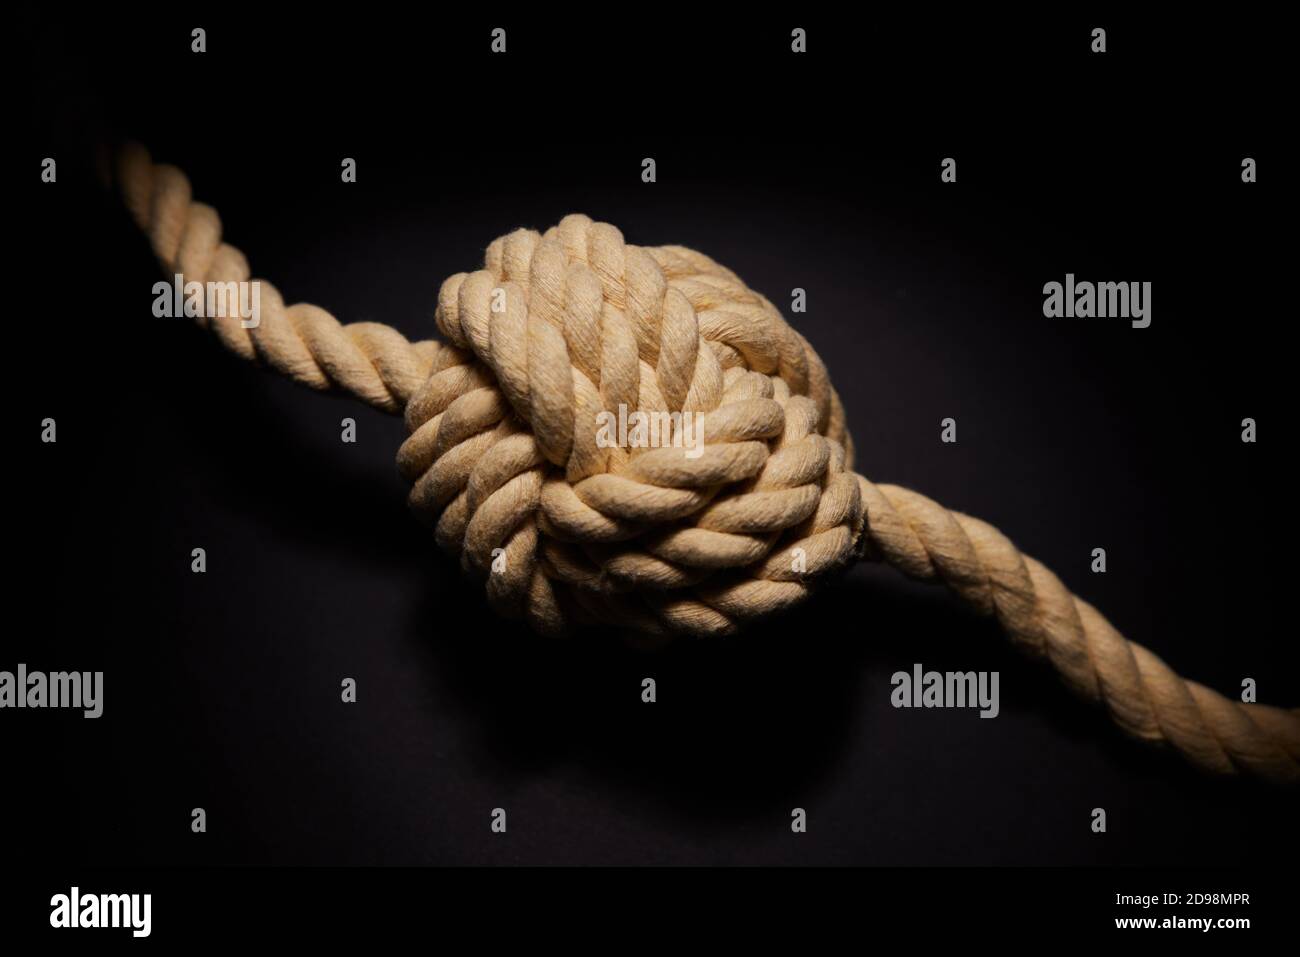 Concept Shot Of Rope Tied With Knot On Black Background To Illustrate Problem Or Mental Health Issue Stock Photo